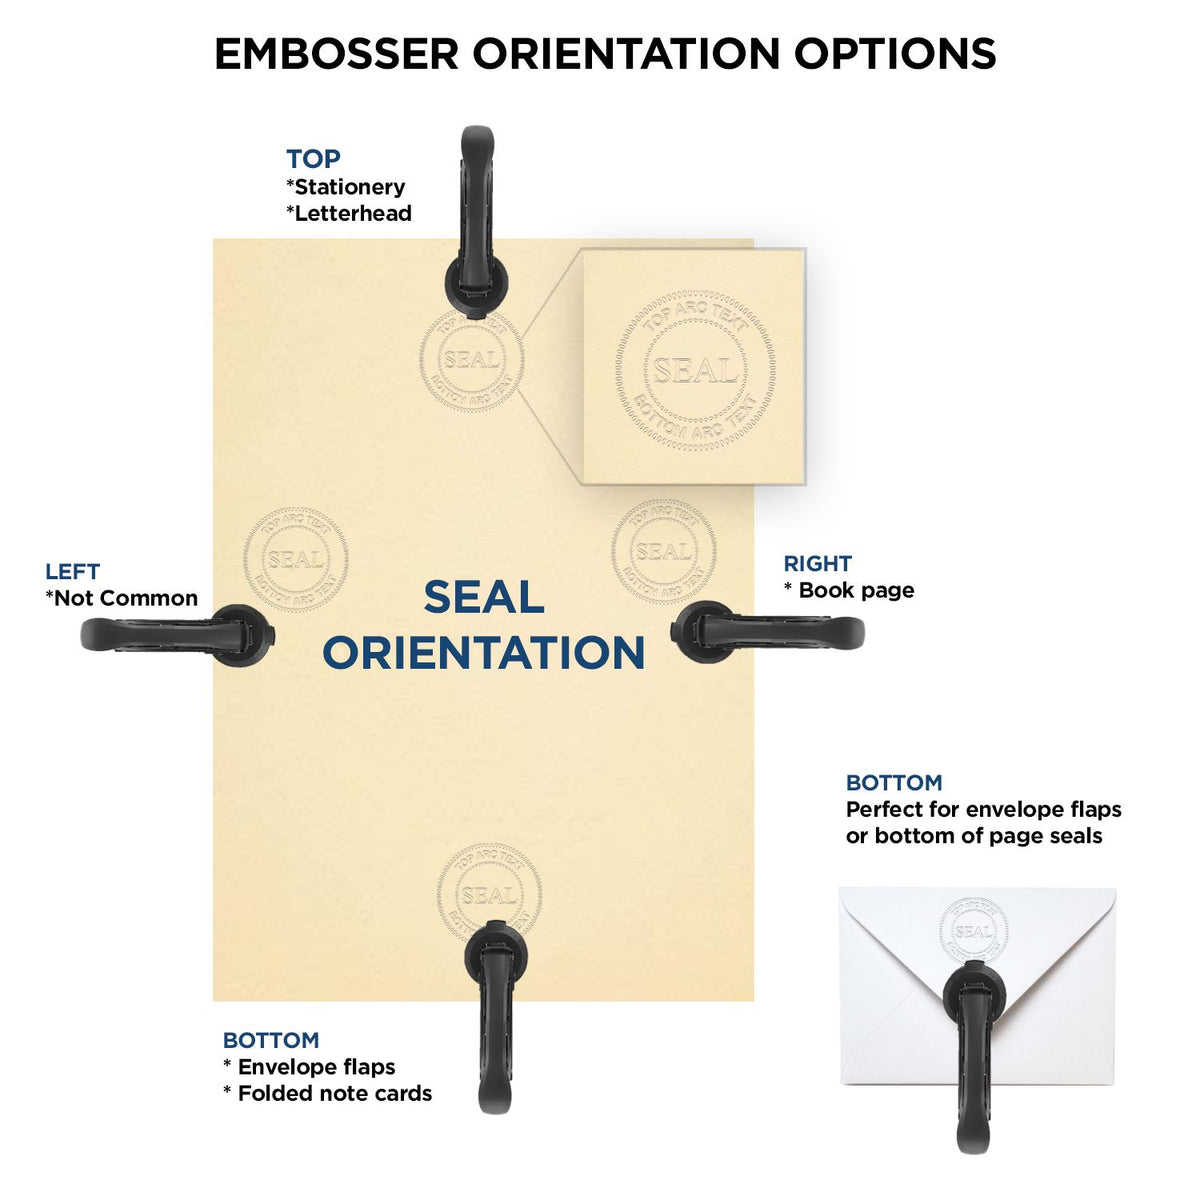 An infographic for the Pennsylvania Desk Architect Embossing Seal showing embosser orientation, this is showing examples of a top, bottom, right and left insert.